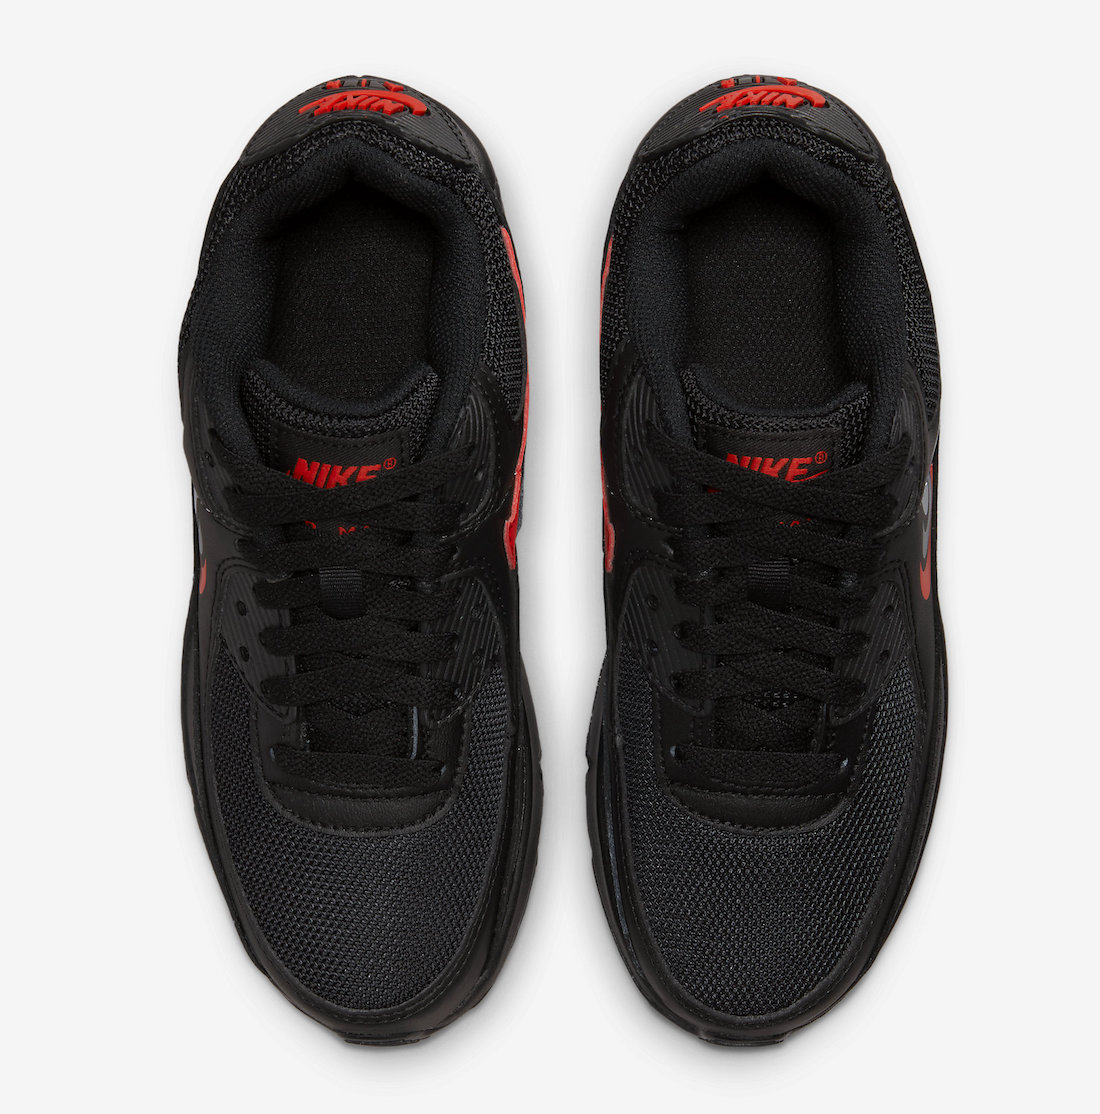 Nike Air Max 90 Black Red DX9272-001 Release Date | SBD